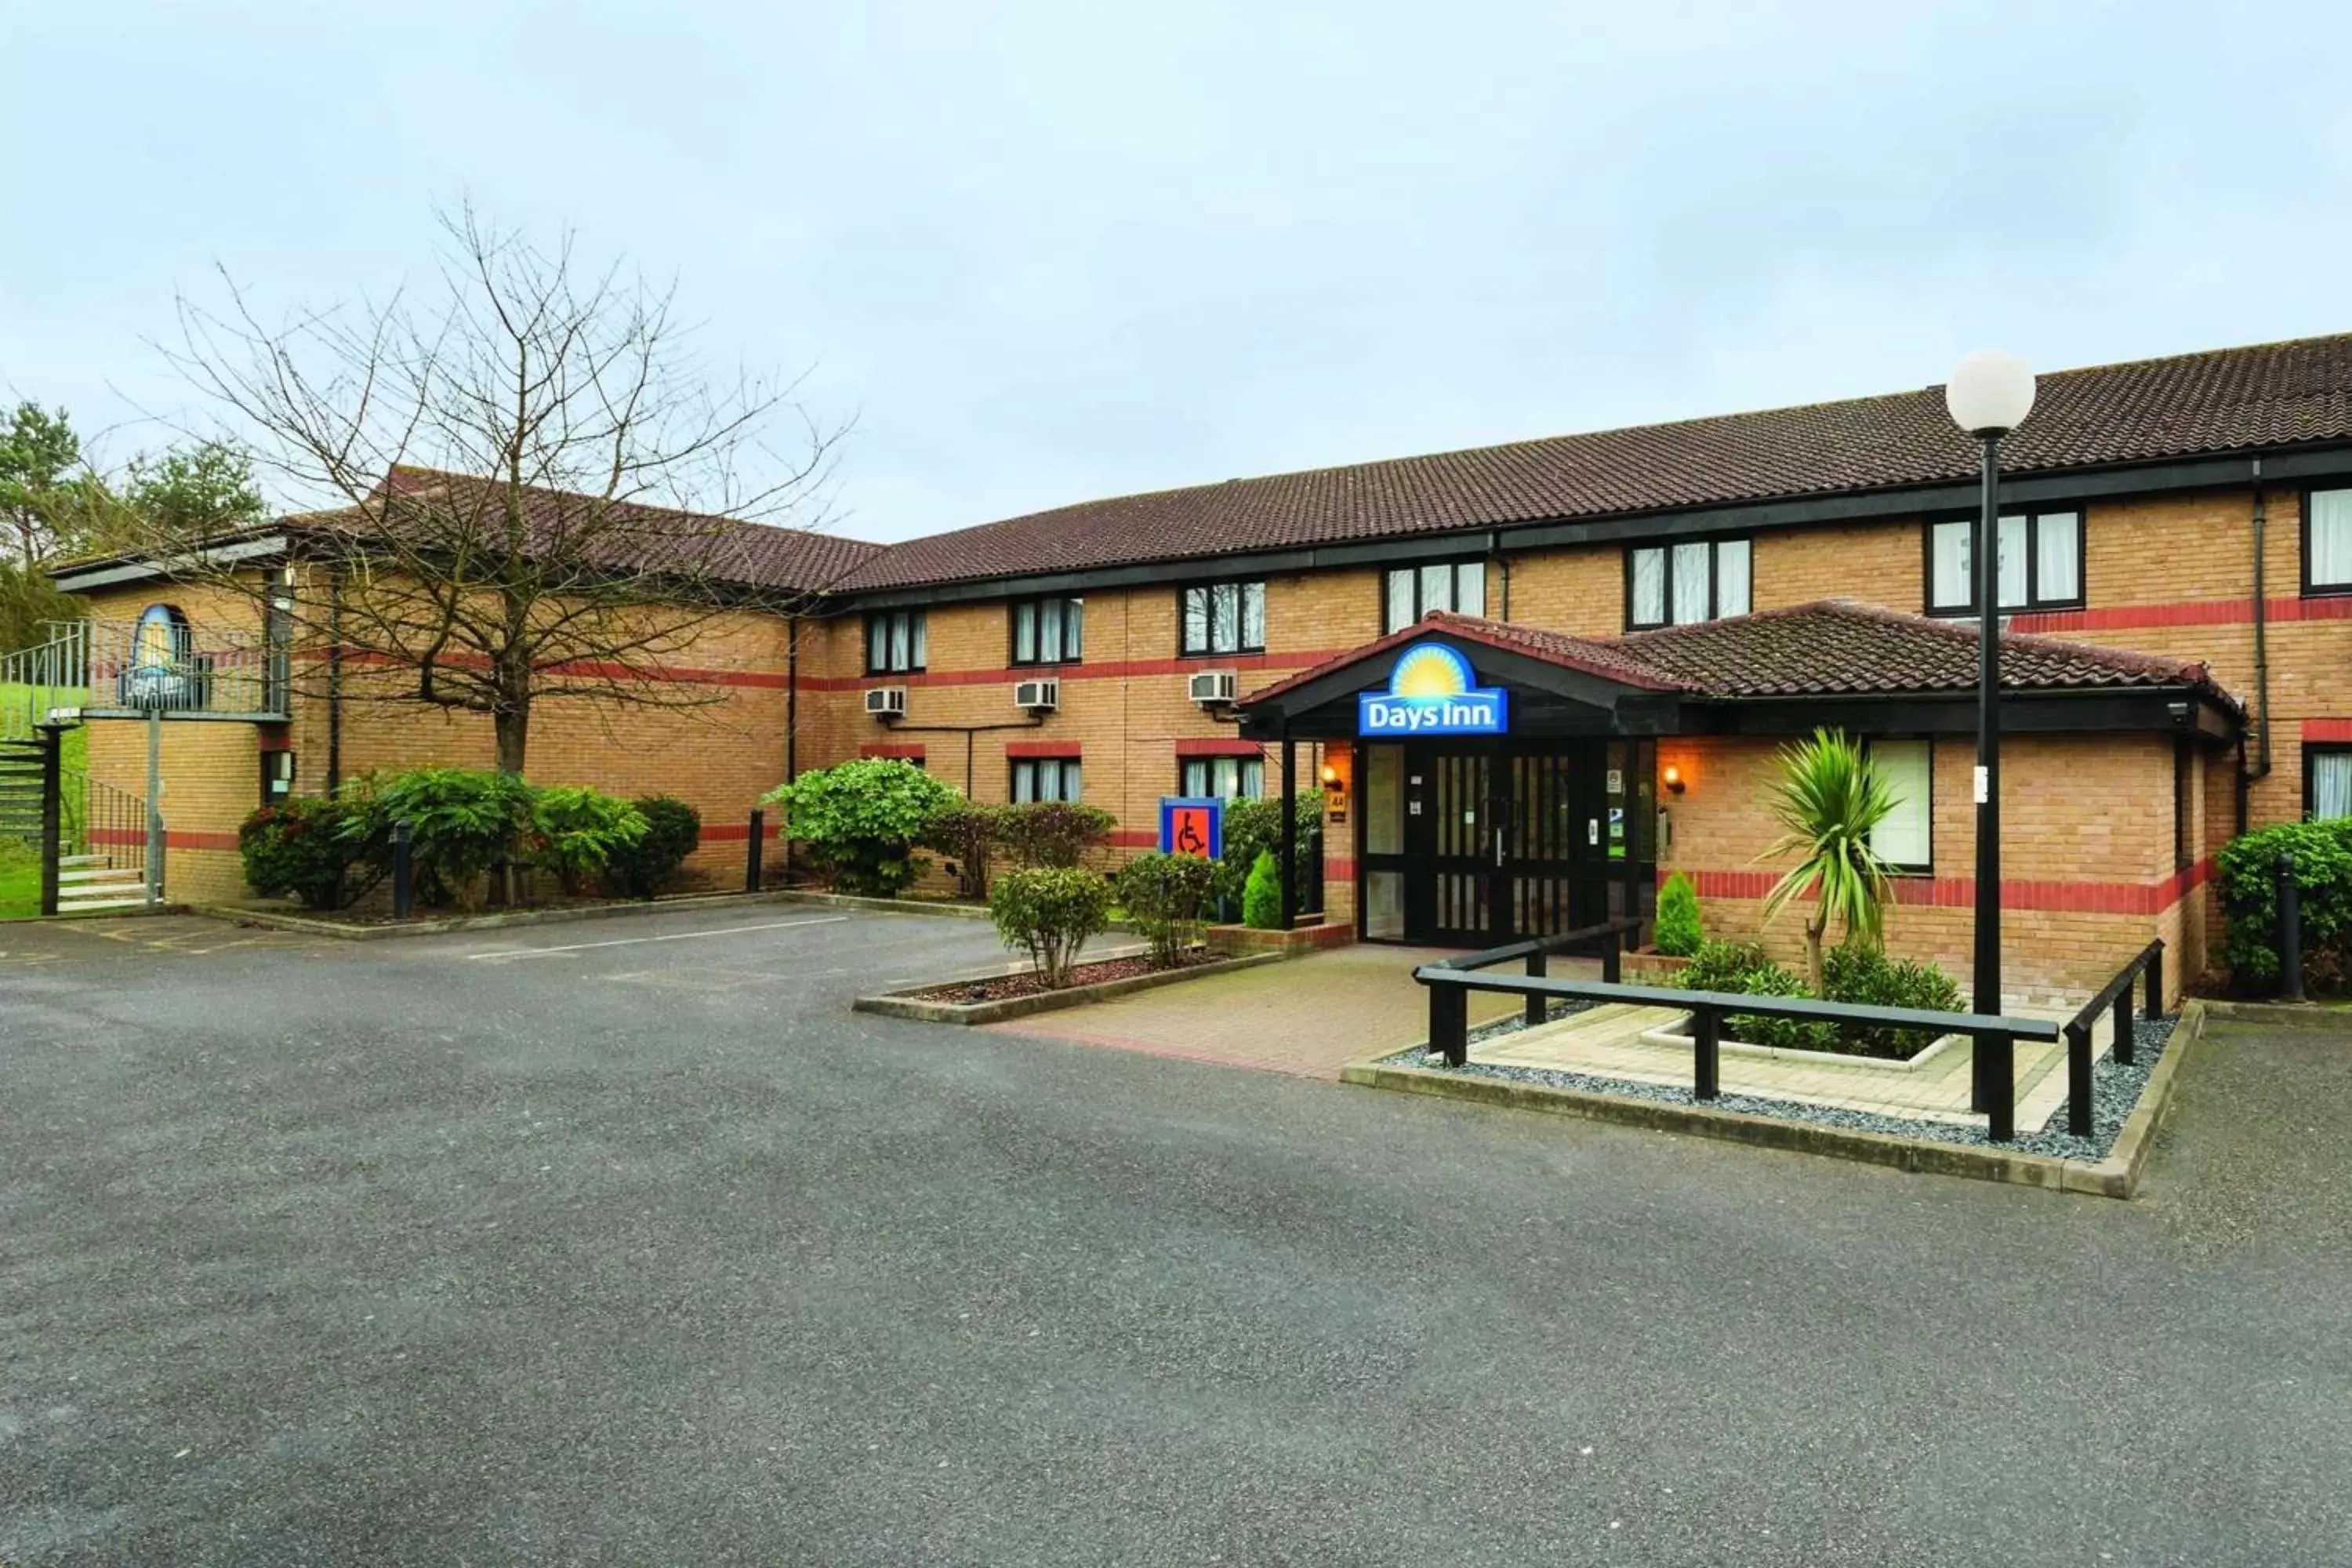 Property Building in Days Inn London Stansted Airport